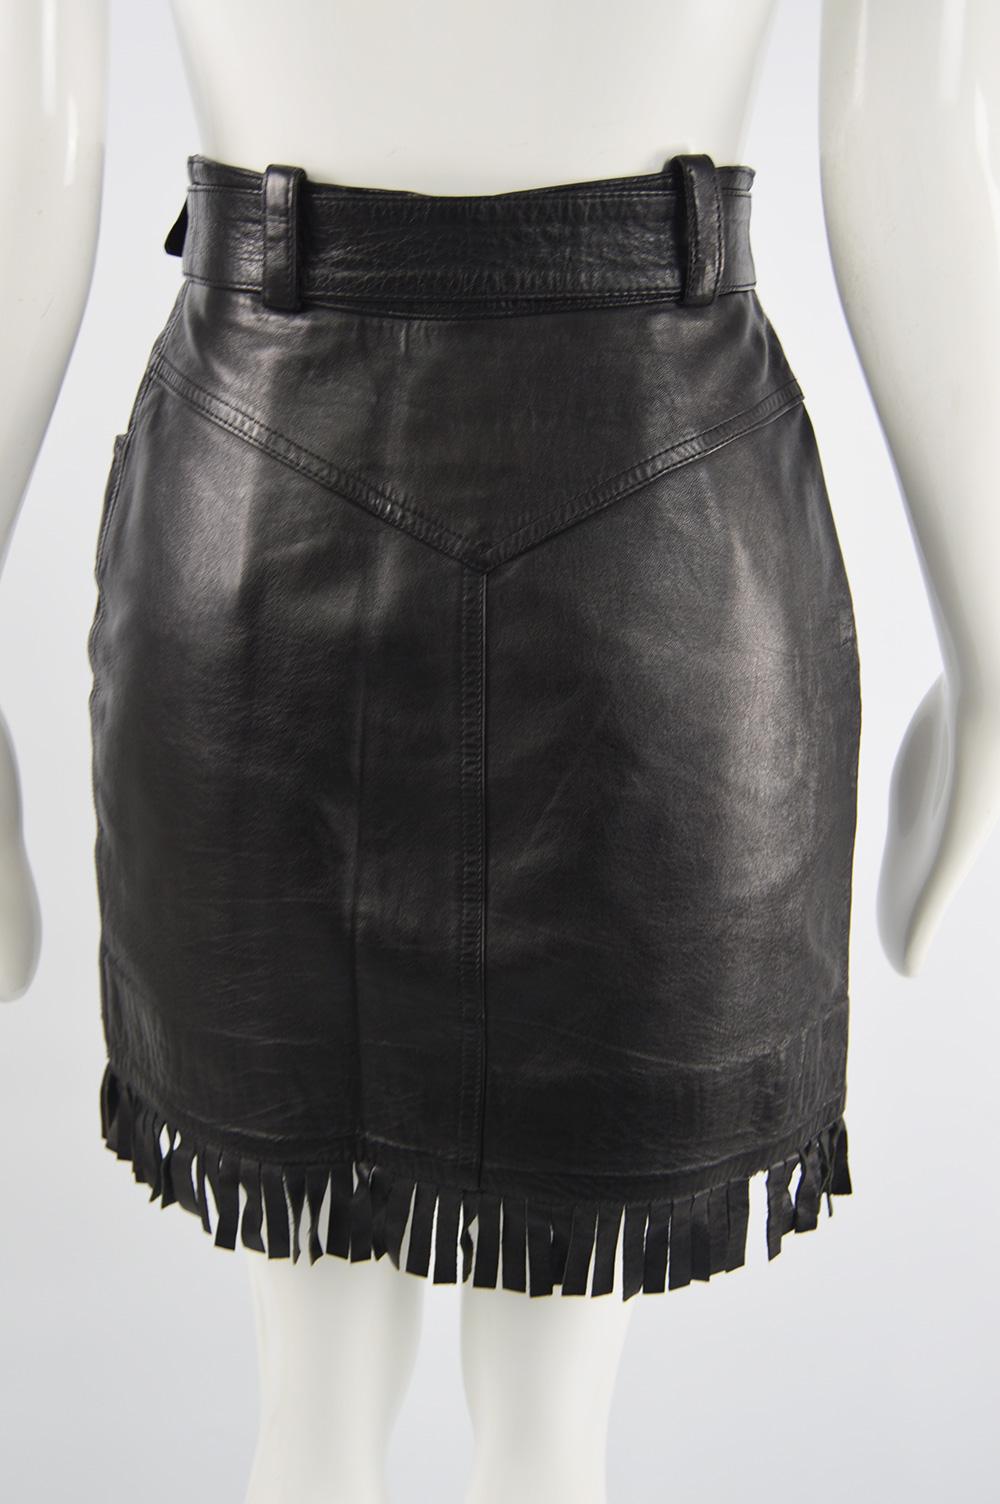 Women's Claude Montana Vintage Black Leather Belted Fringed Western Style Skirt, 1990s For Sale